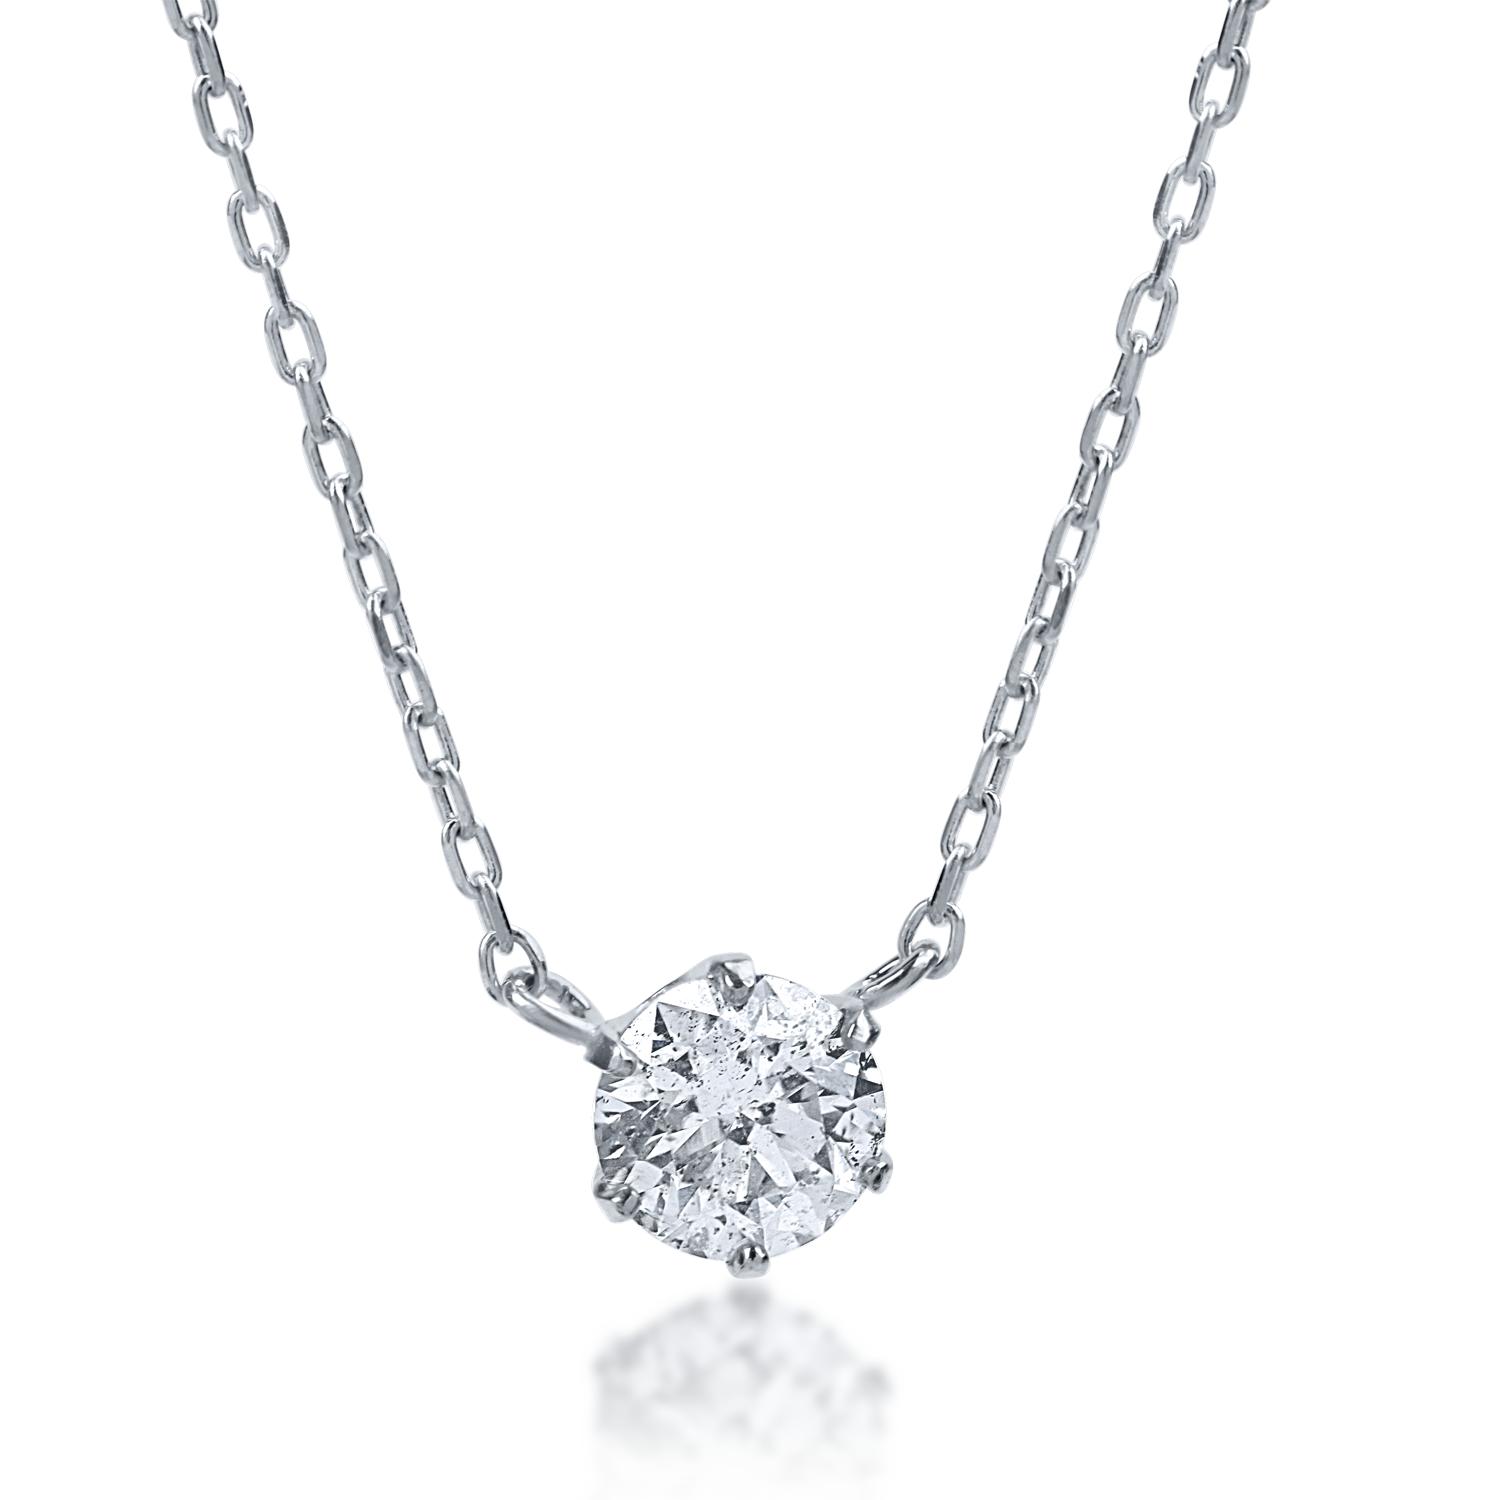 White gold pendant necklace with 0.22ct diamond